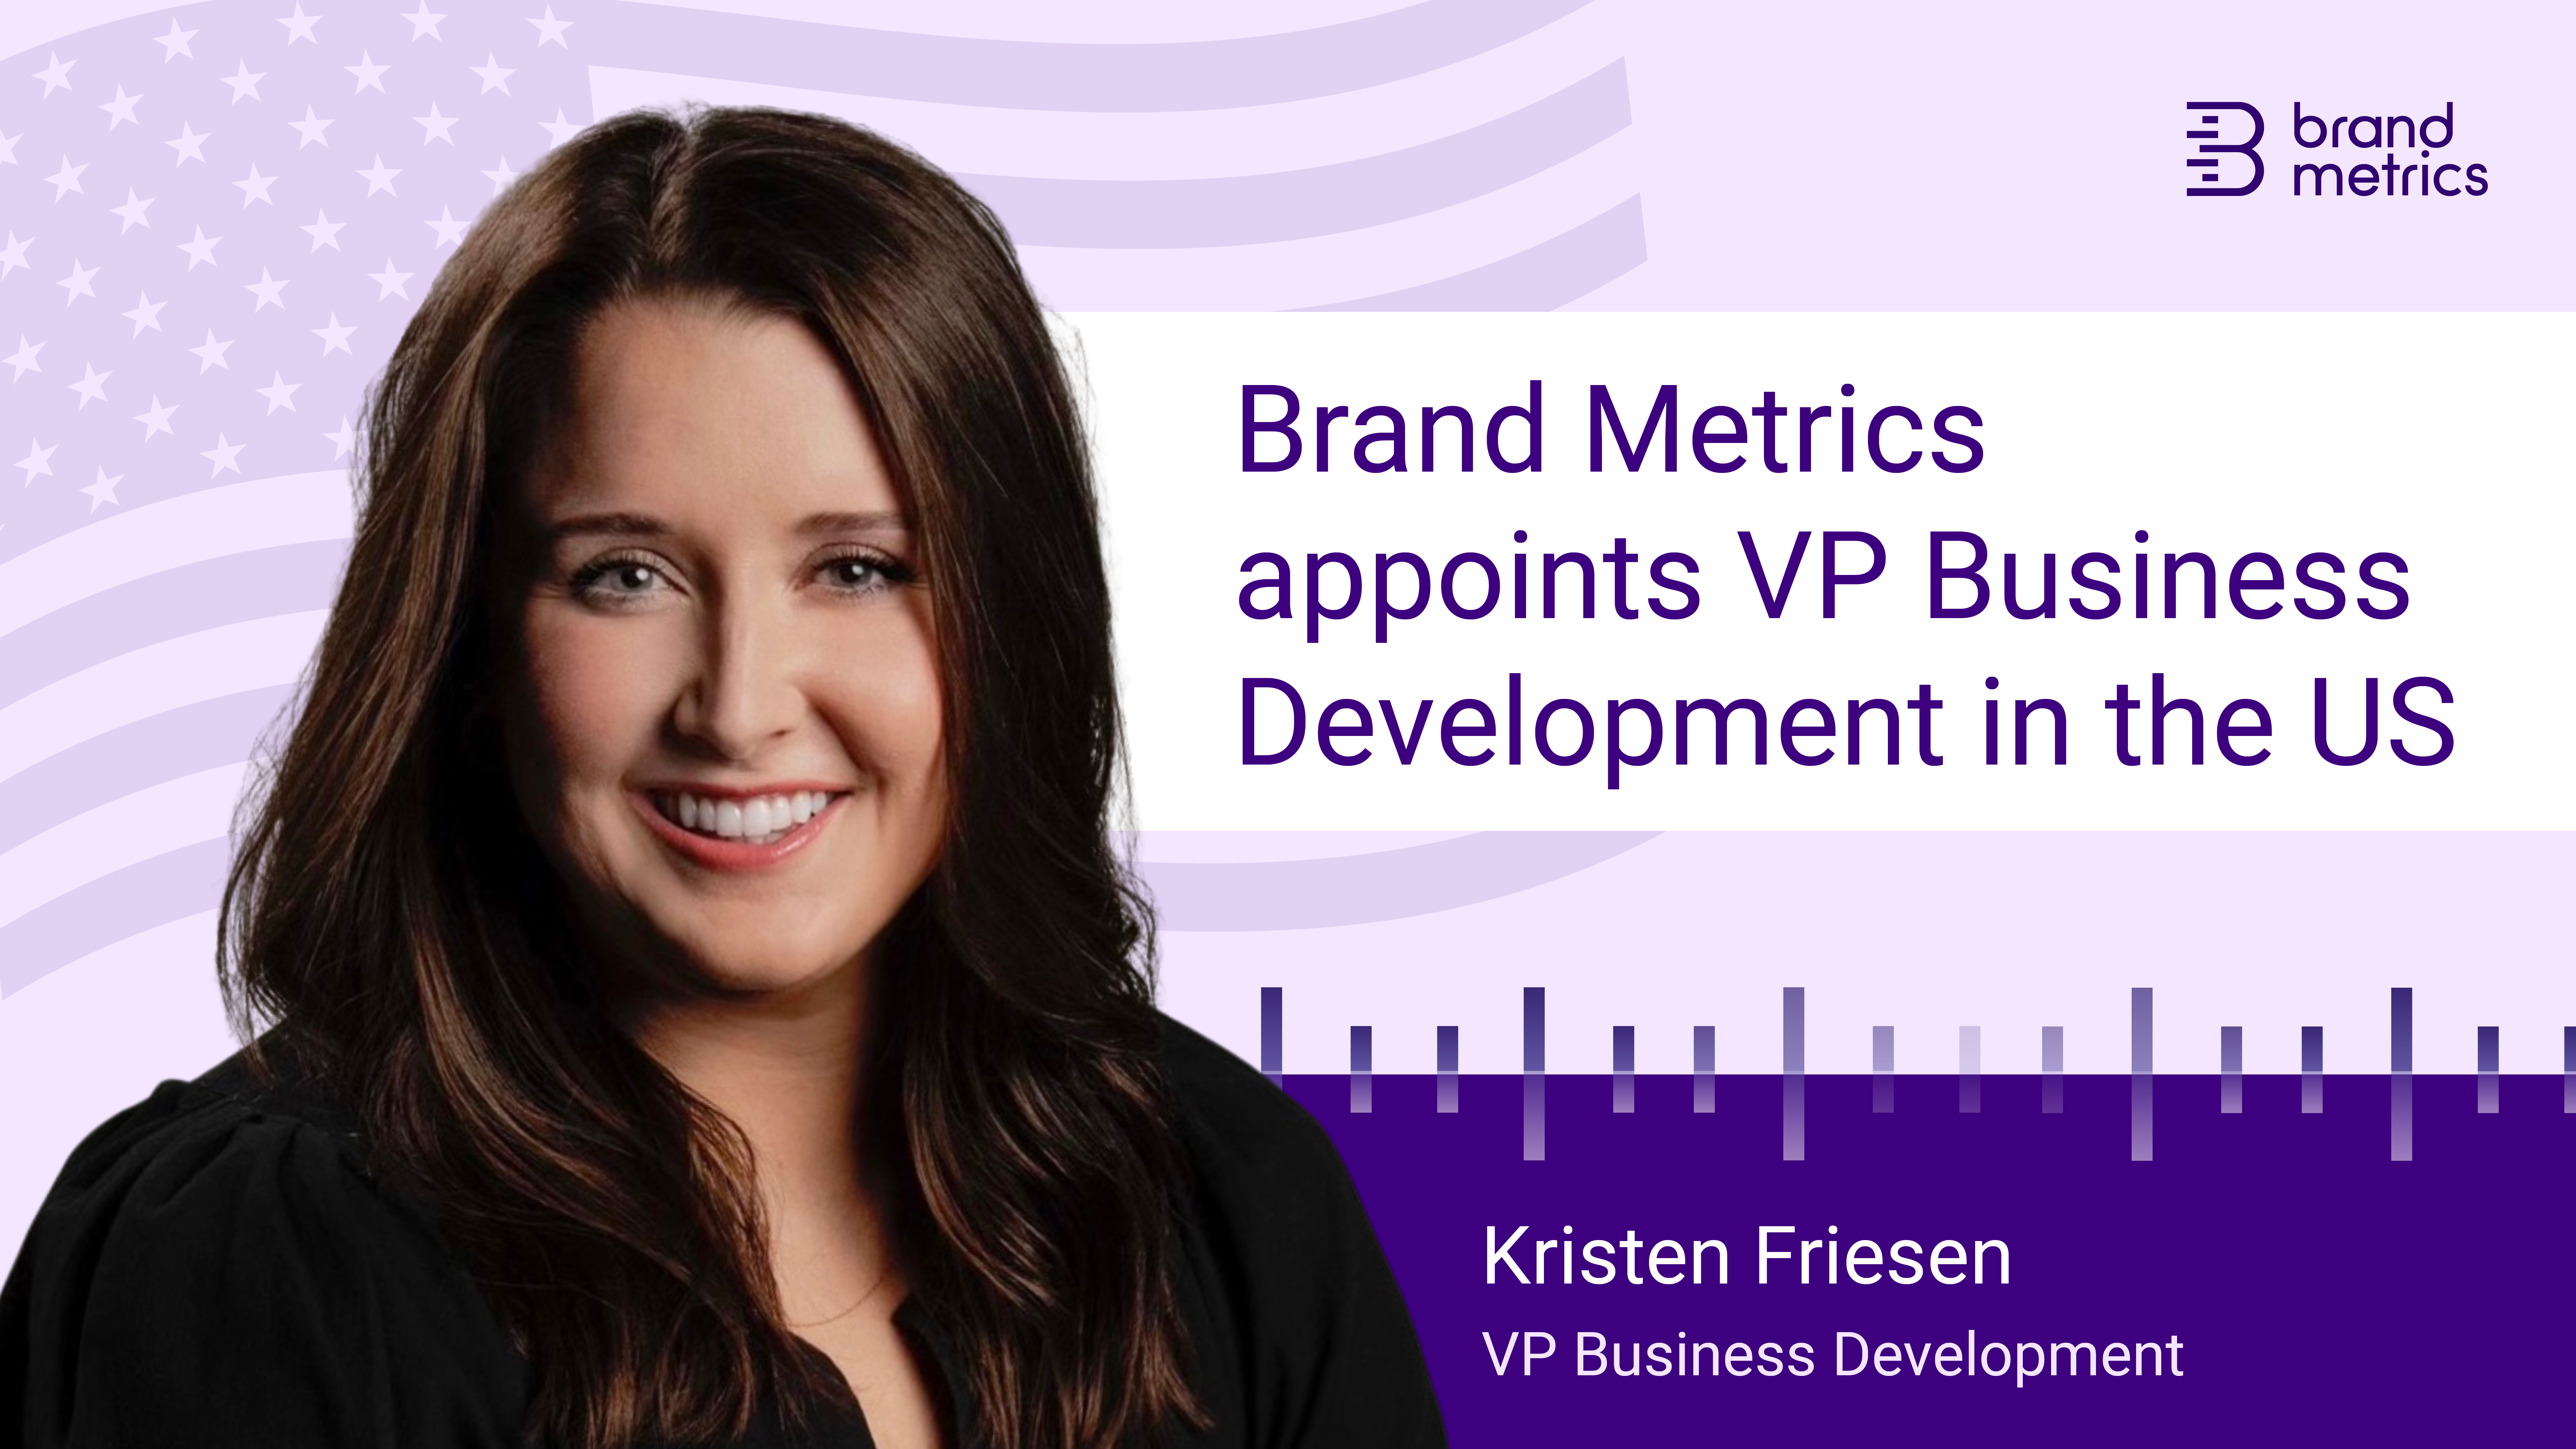 <strong>Brand Metrics continues on steep growth trajectory with appointment of VP Business Development in the US</strong>